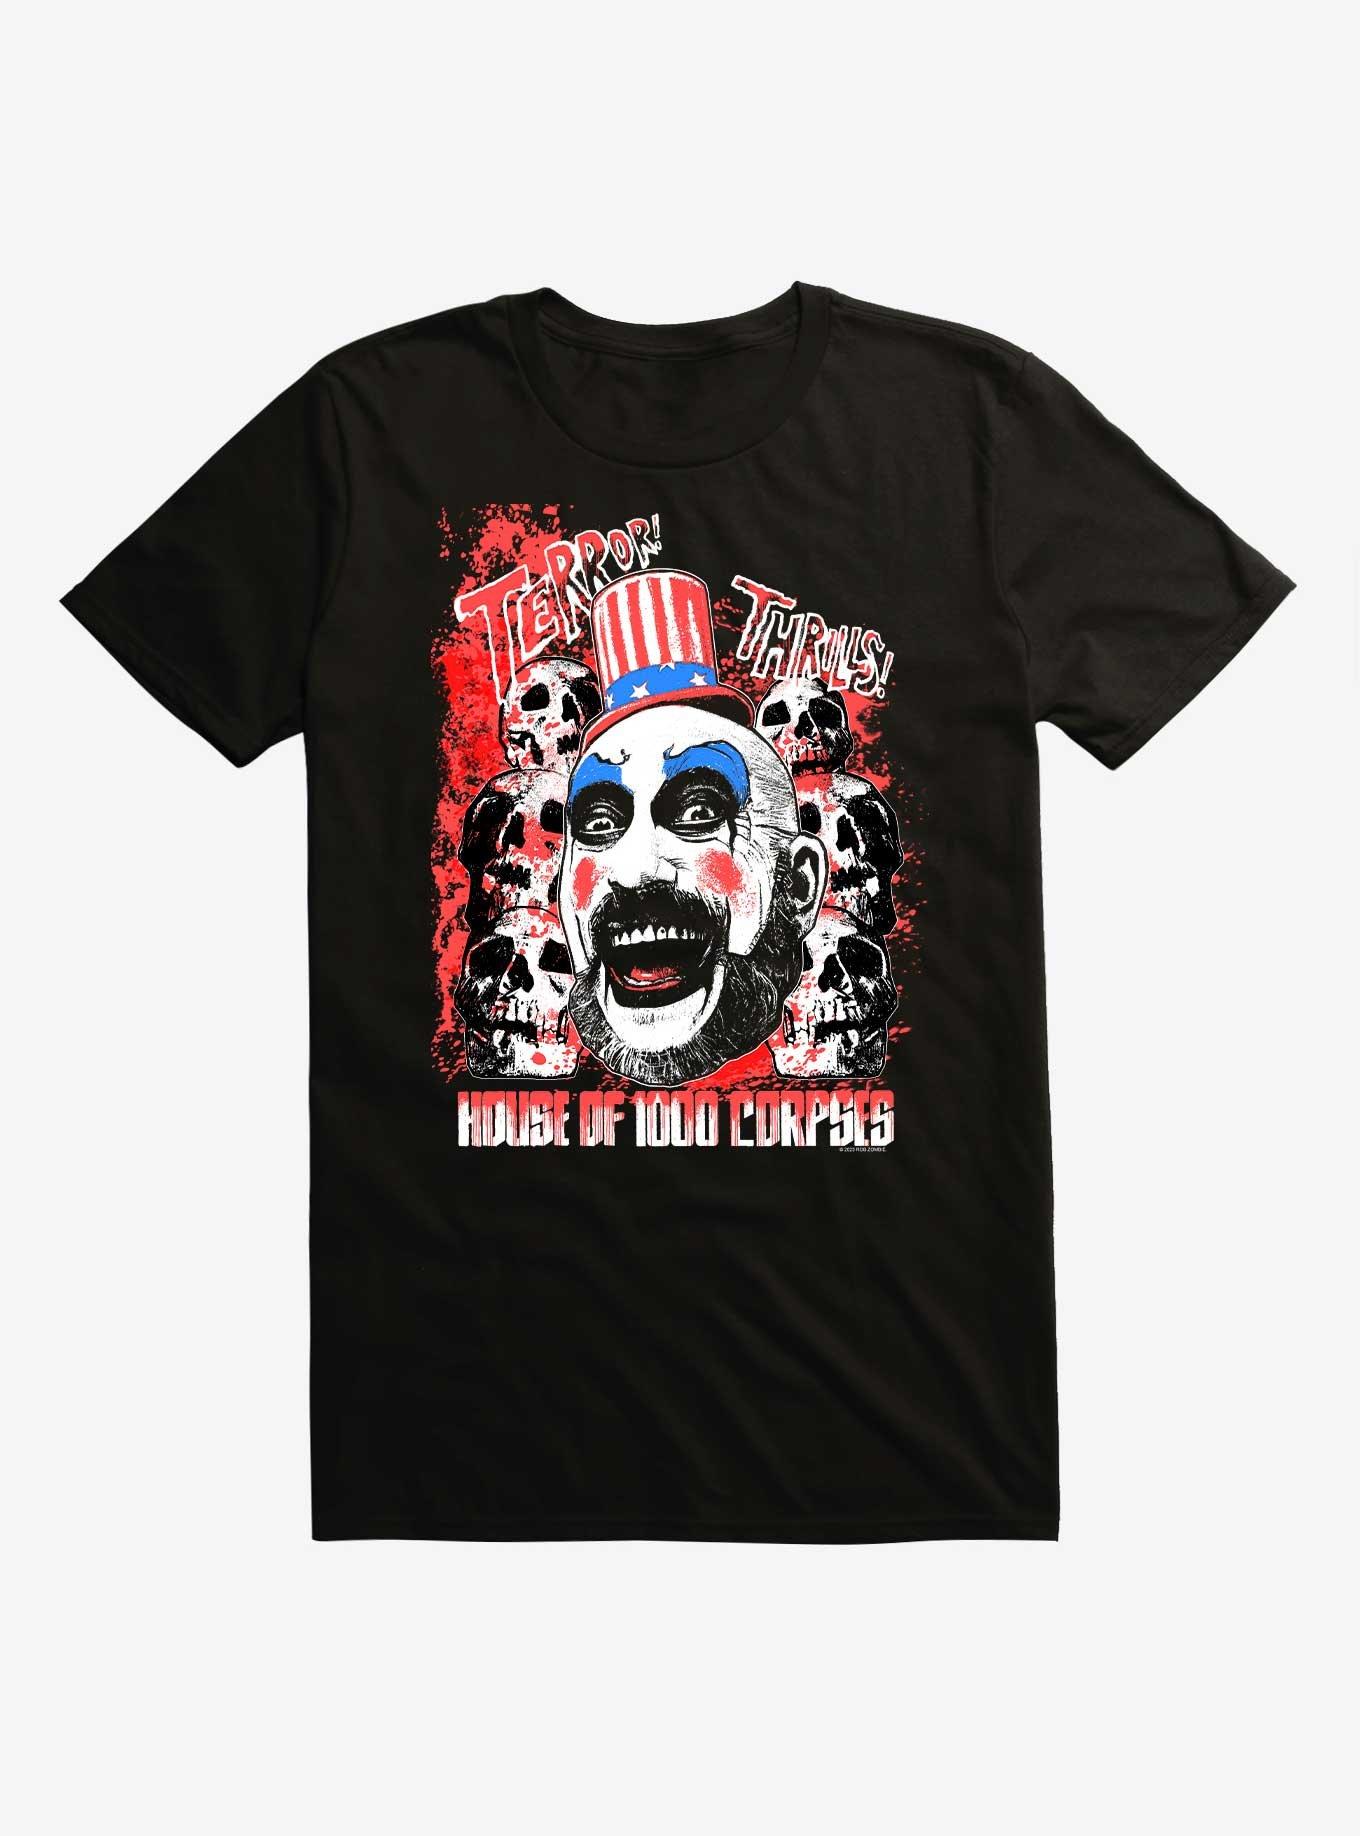 House Of 1000 Corpses Terror! Thrills! T-Shirt - BLACK | Hot Topic